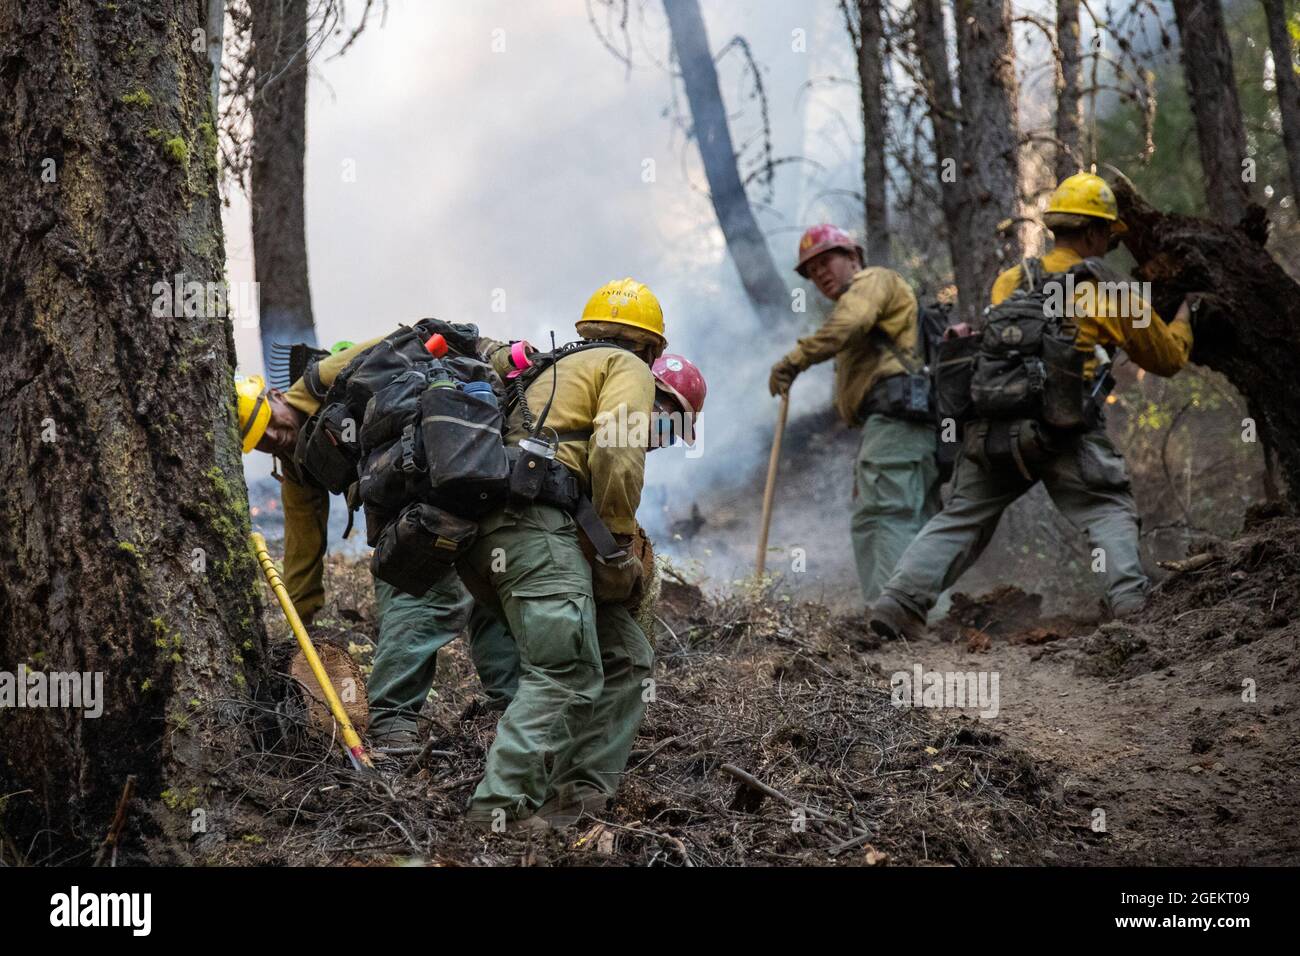 Greenville, USA. 20th Aug, 2021. Firefighters work in an area hit by the Dixie Fire near Greenville town in Northern California, the United States, on Aug. 19, 2021. The Dixie Fire has burned more than 700,000 acres as of Friday afternoon in remote Northern California. Credit: Dong Xudong/Xinhua/Alamy Live News Stock Photo